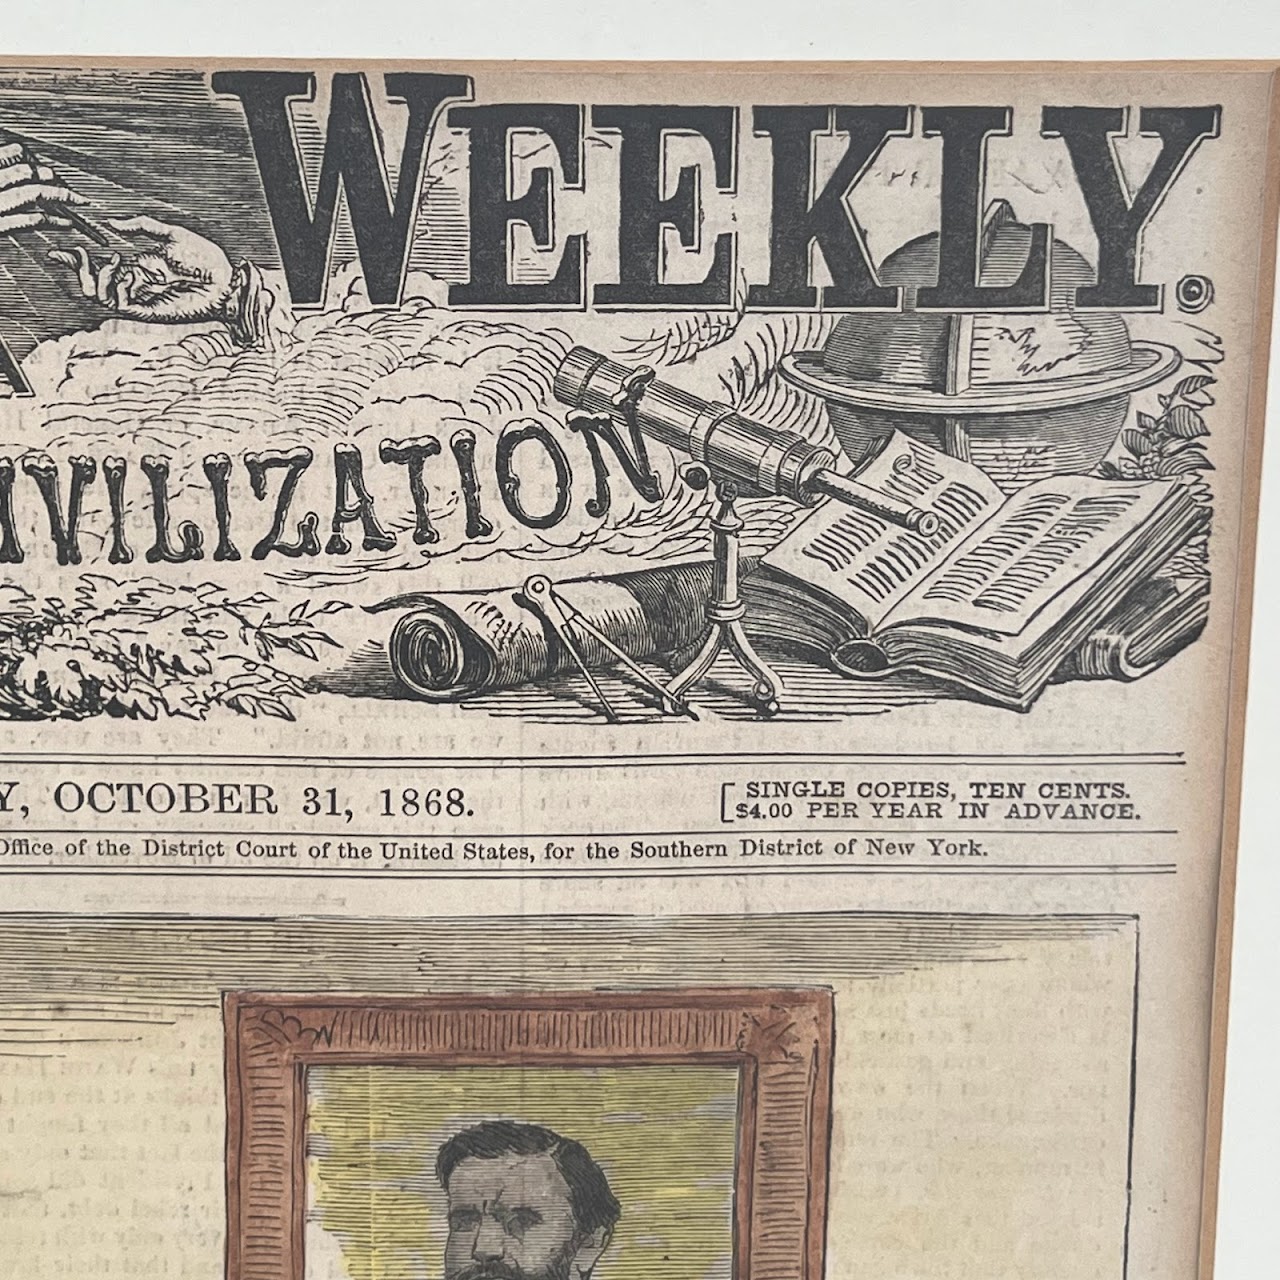 Harper's Weekly 1868 Winslow Homer Engraved Periodical Plate